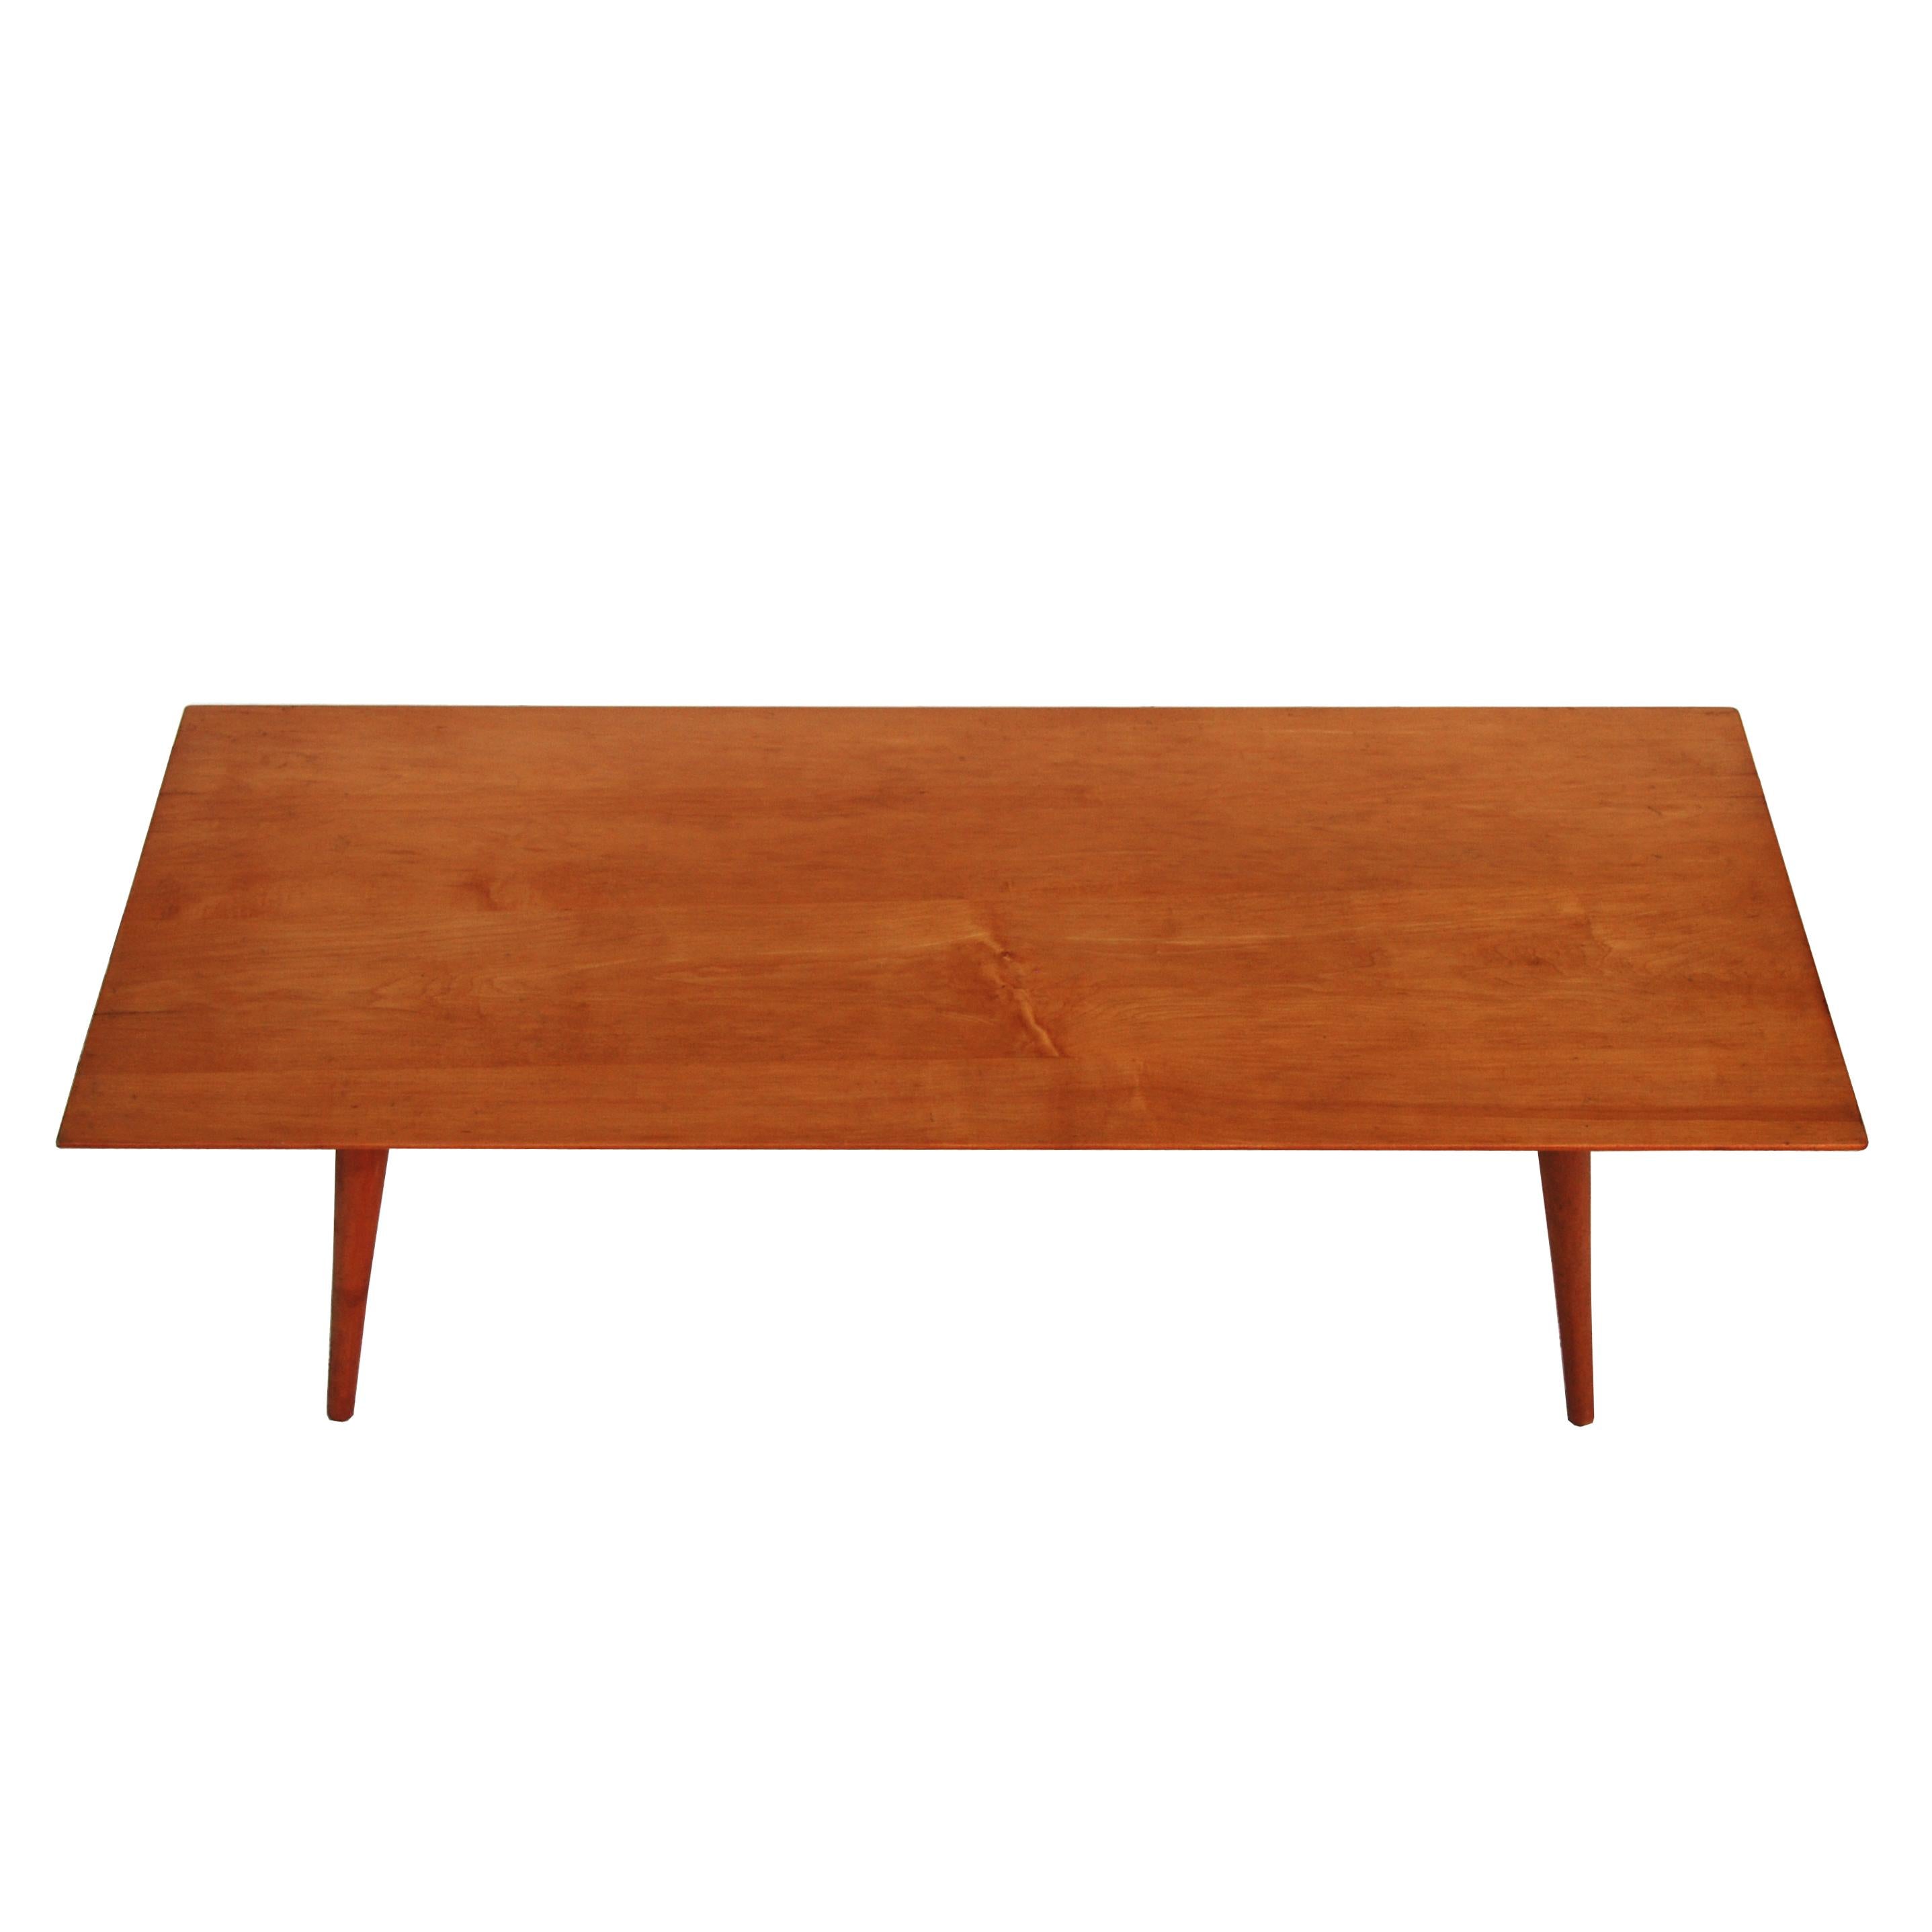 60s style coffee table